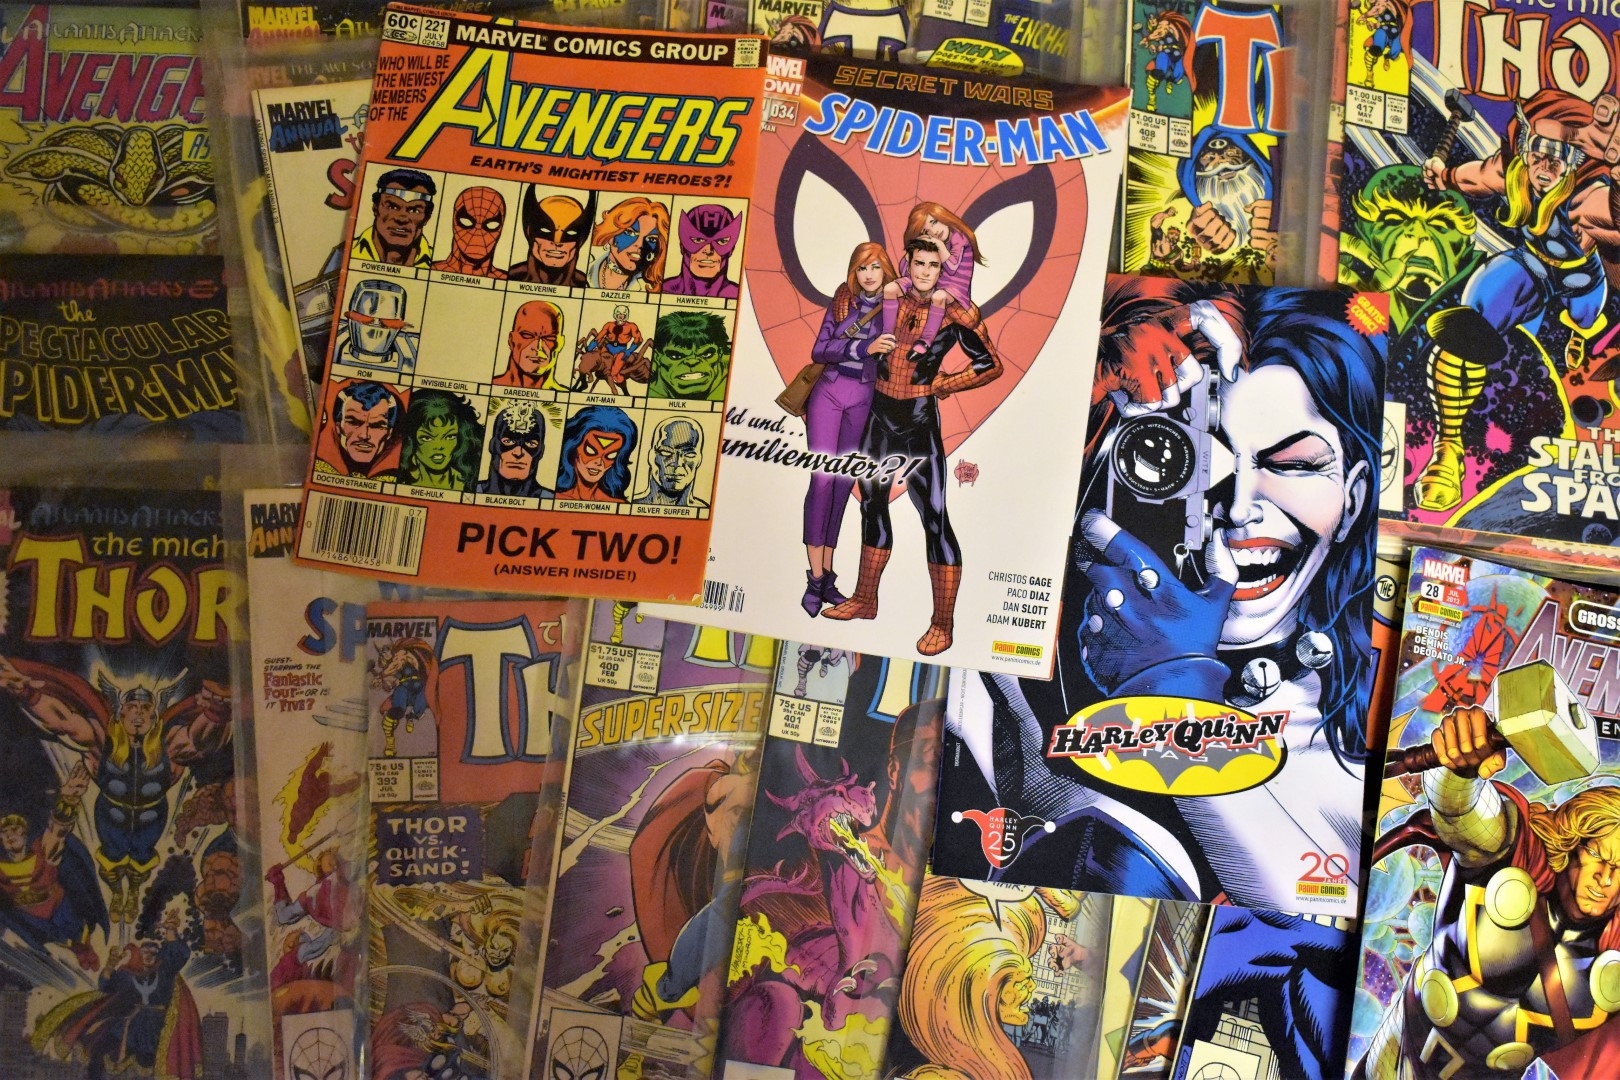 Wall collage of comic book covers featuring superheroes